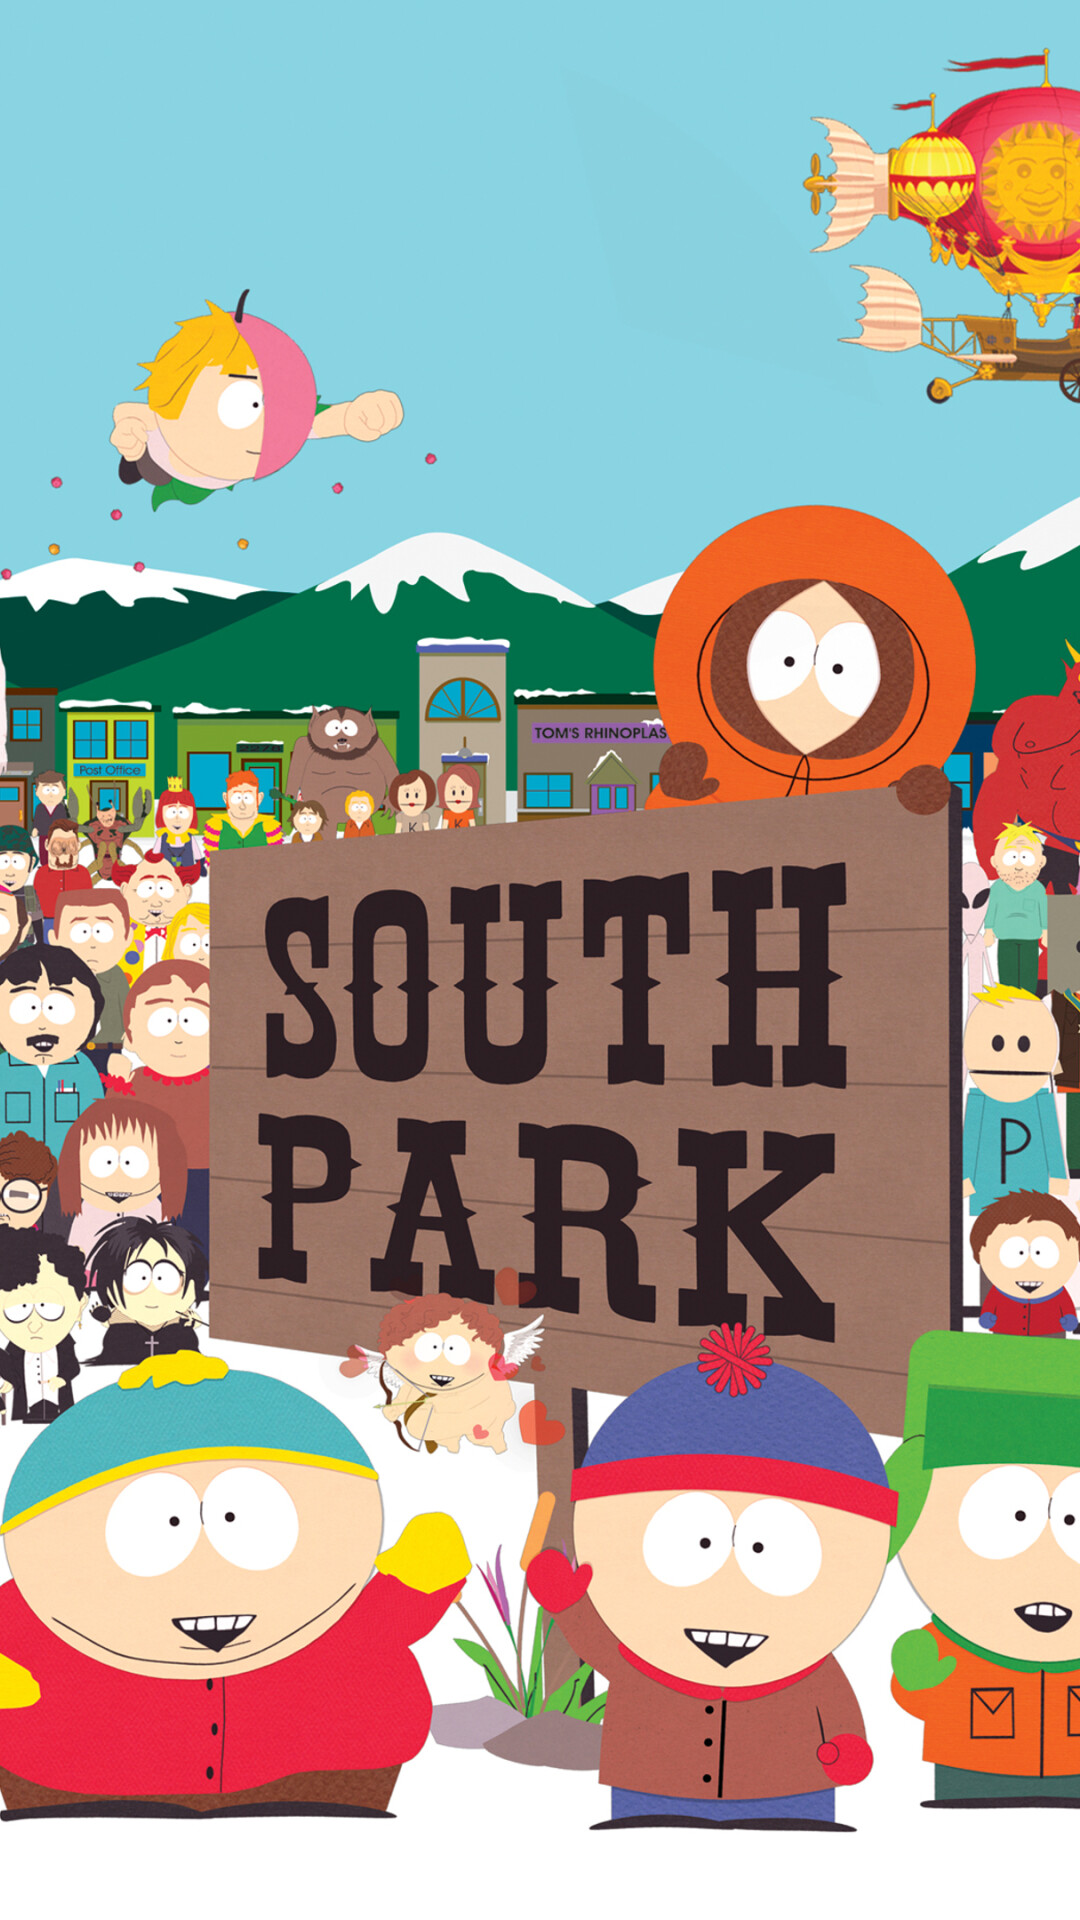 South Park: An adult animated American sitcom, Stan, Kyle, Eric, Kenny. 1080x1920 Full HD Wallpaper.